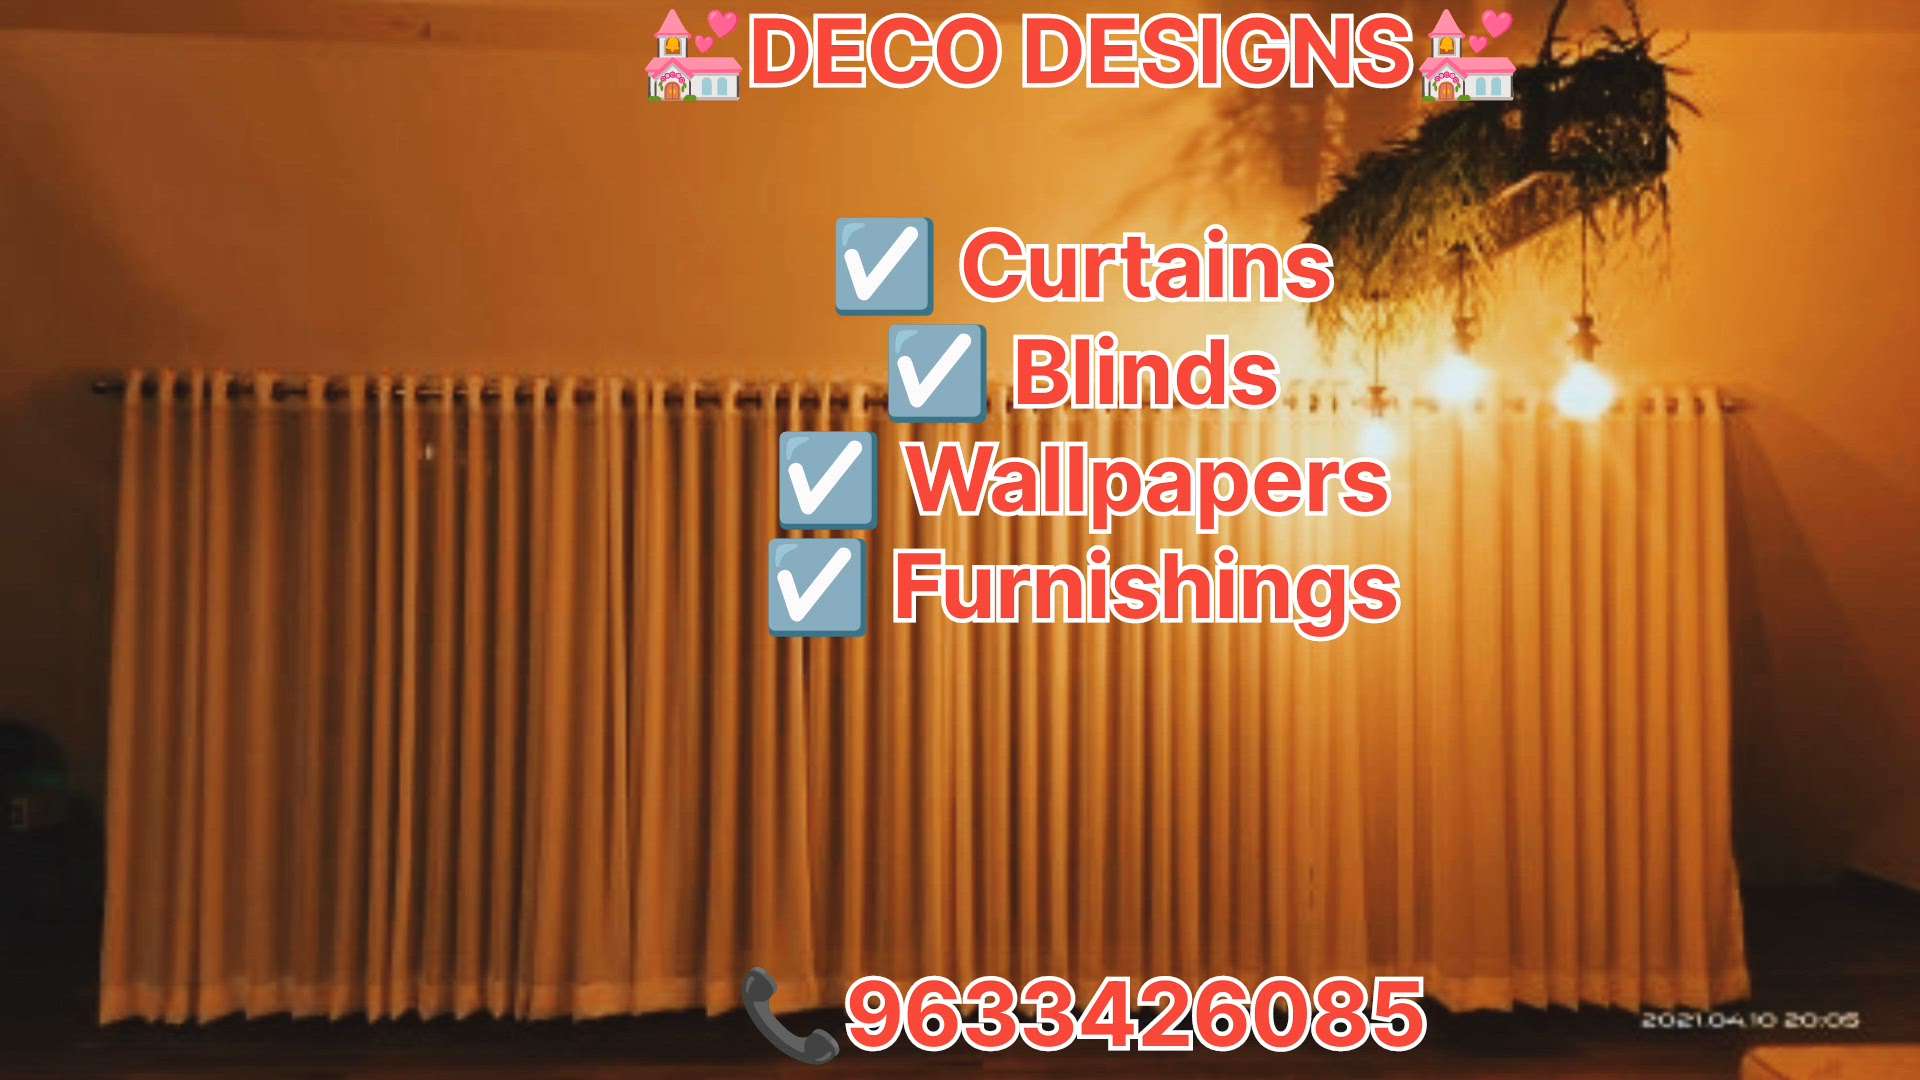 #curtains #blinds #interior_wallpaper #customized_wallpaper #furnitures #motorizedcurtains #motorizedblinds